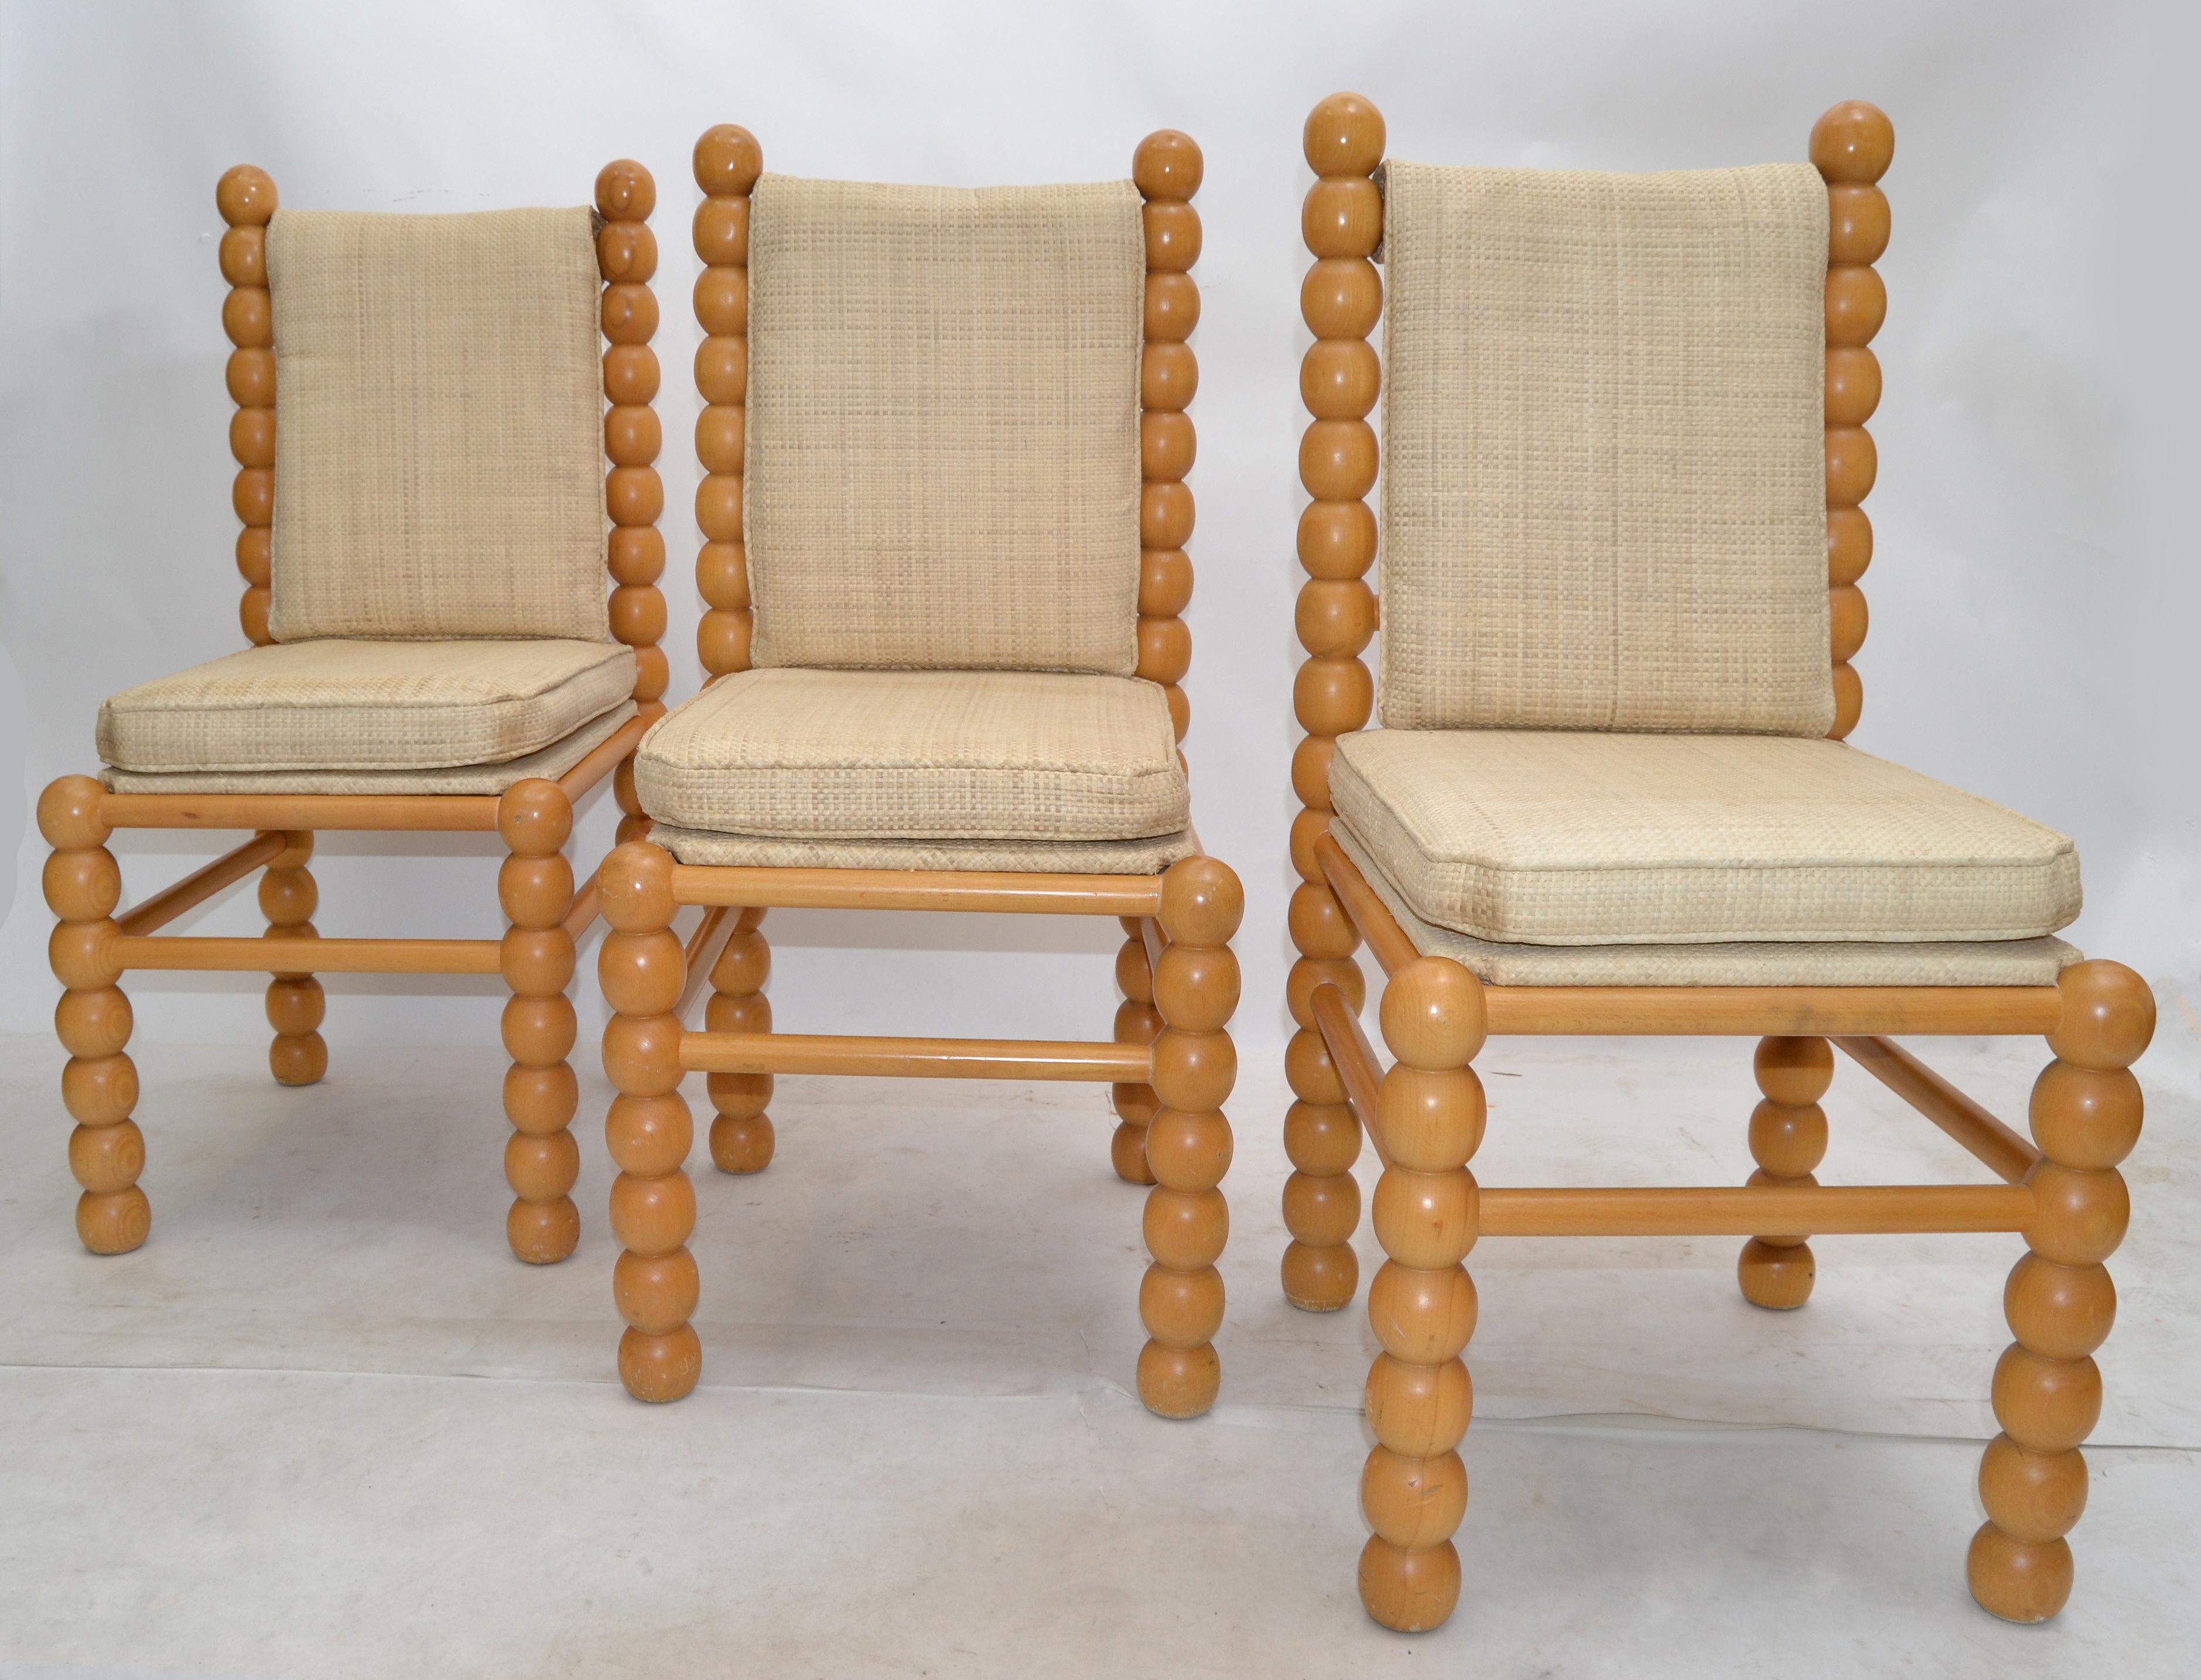 Turned Birch Wood & Fabric Upholstery Dining Chair Mid-Century Modern, Set of 3 In Good Condition For Sale In Miami, FL